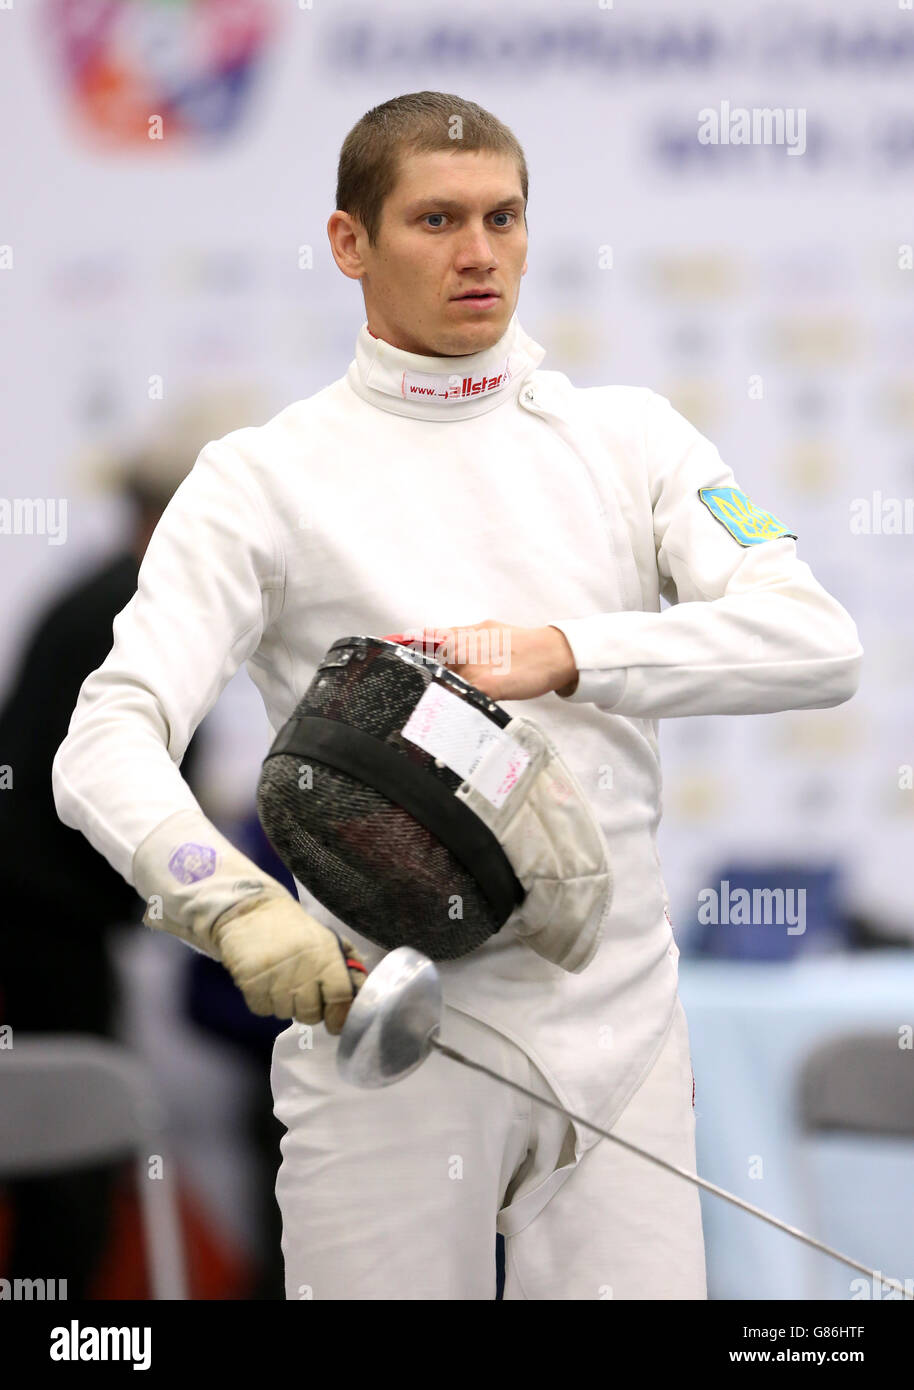 Ukraine's Dmyytro Kirpulyanskyy during day two of the European Modern Pentathlon Championships at the University of Bath. PRESS ASSOCIATION Photo. Picture date: Wednesday August 19, 2015. See PA story PENTATHLON European. Photo credit should read: Tim Goode/ PA Wire Stock Photo